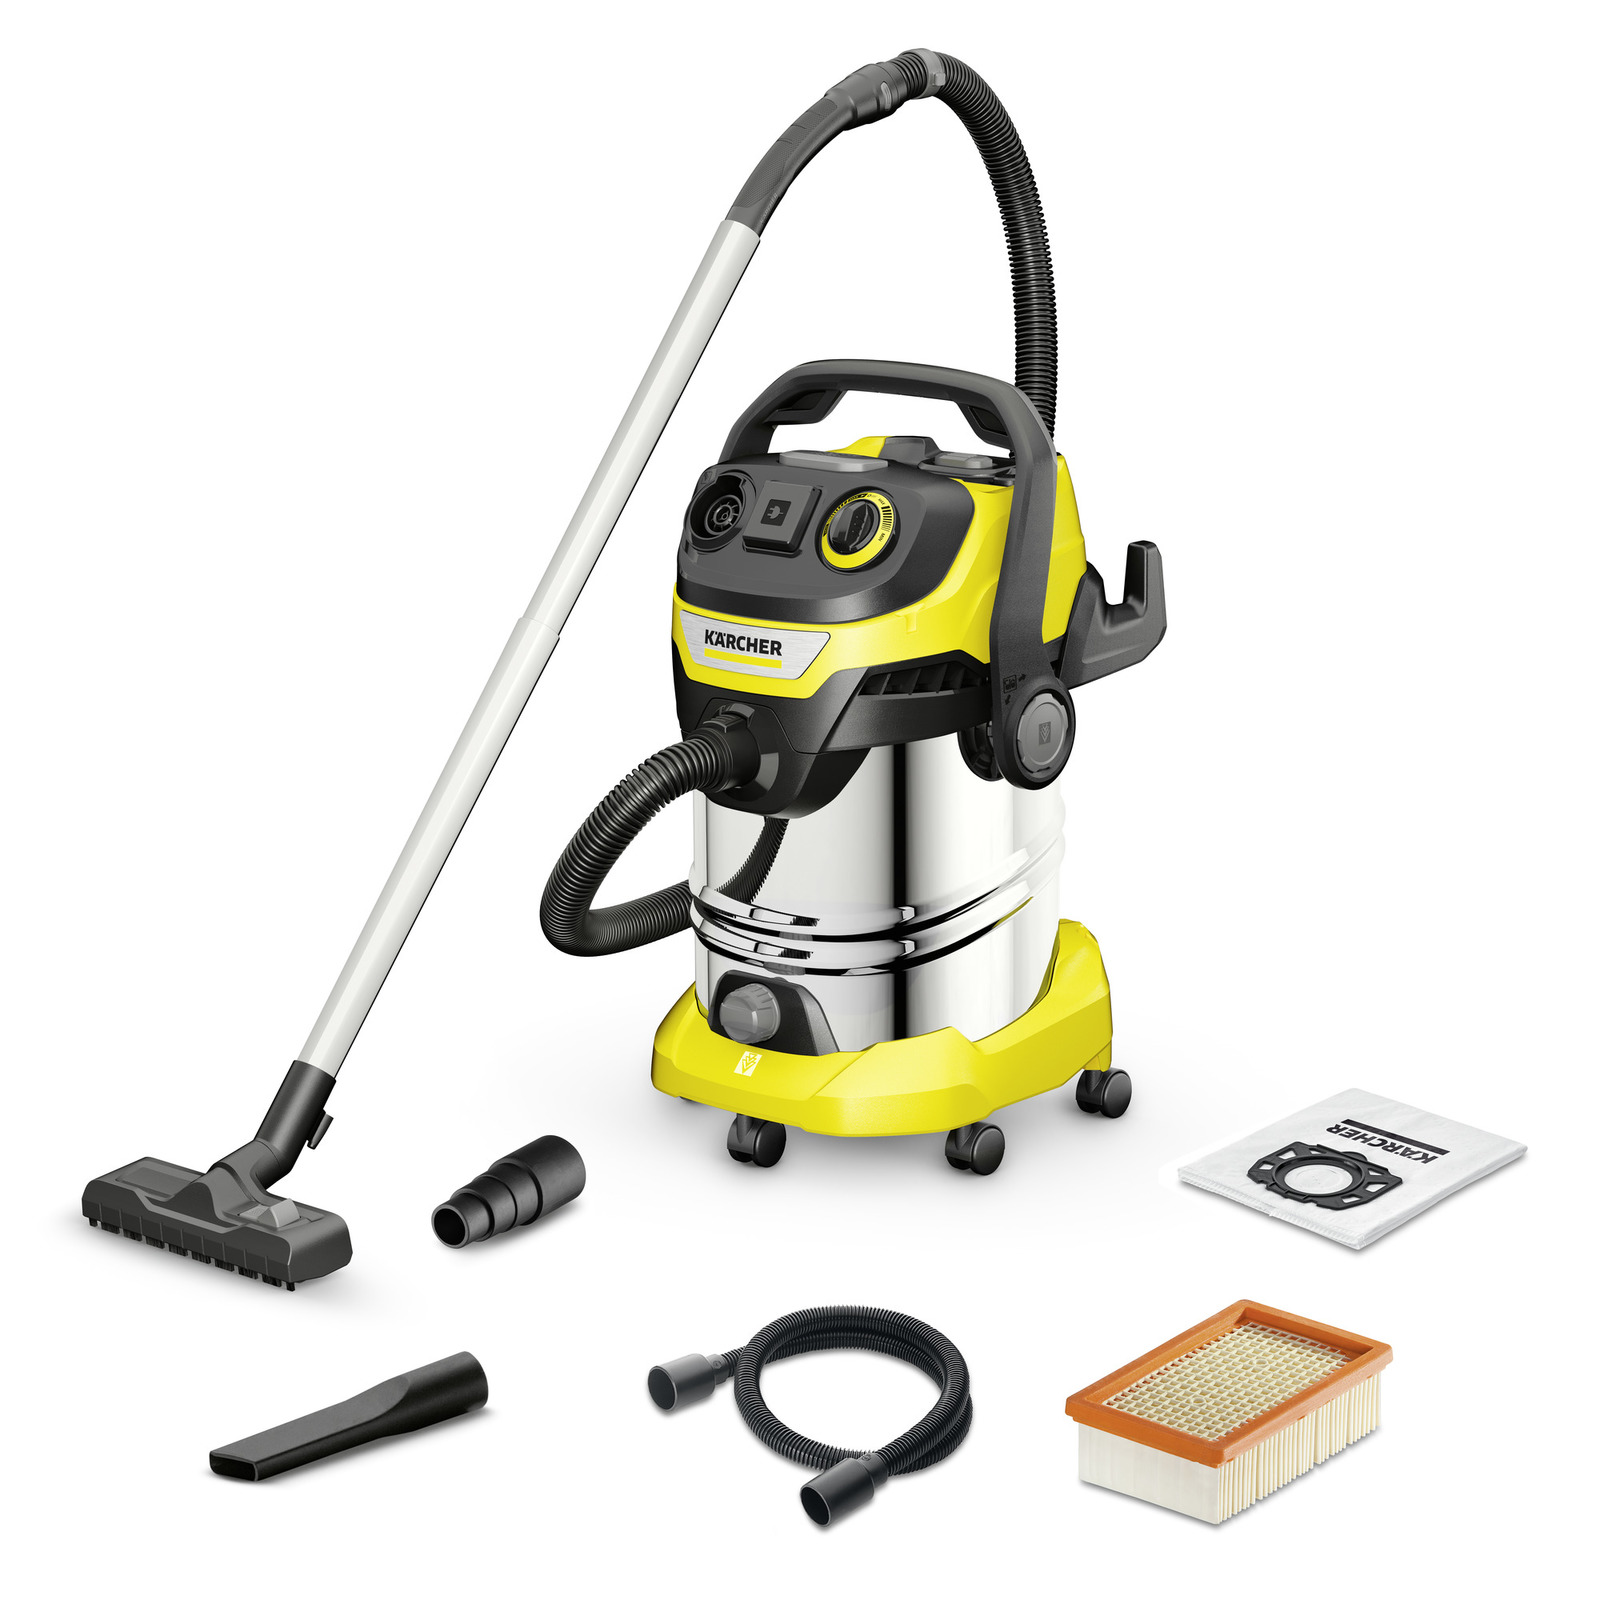 Karcher Wet & Dry Vacuum Cleaner 2000 Watt WD6 Premium Prices & Features in  Egypt. Free Home Delivery. Cairo Sales Stores